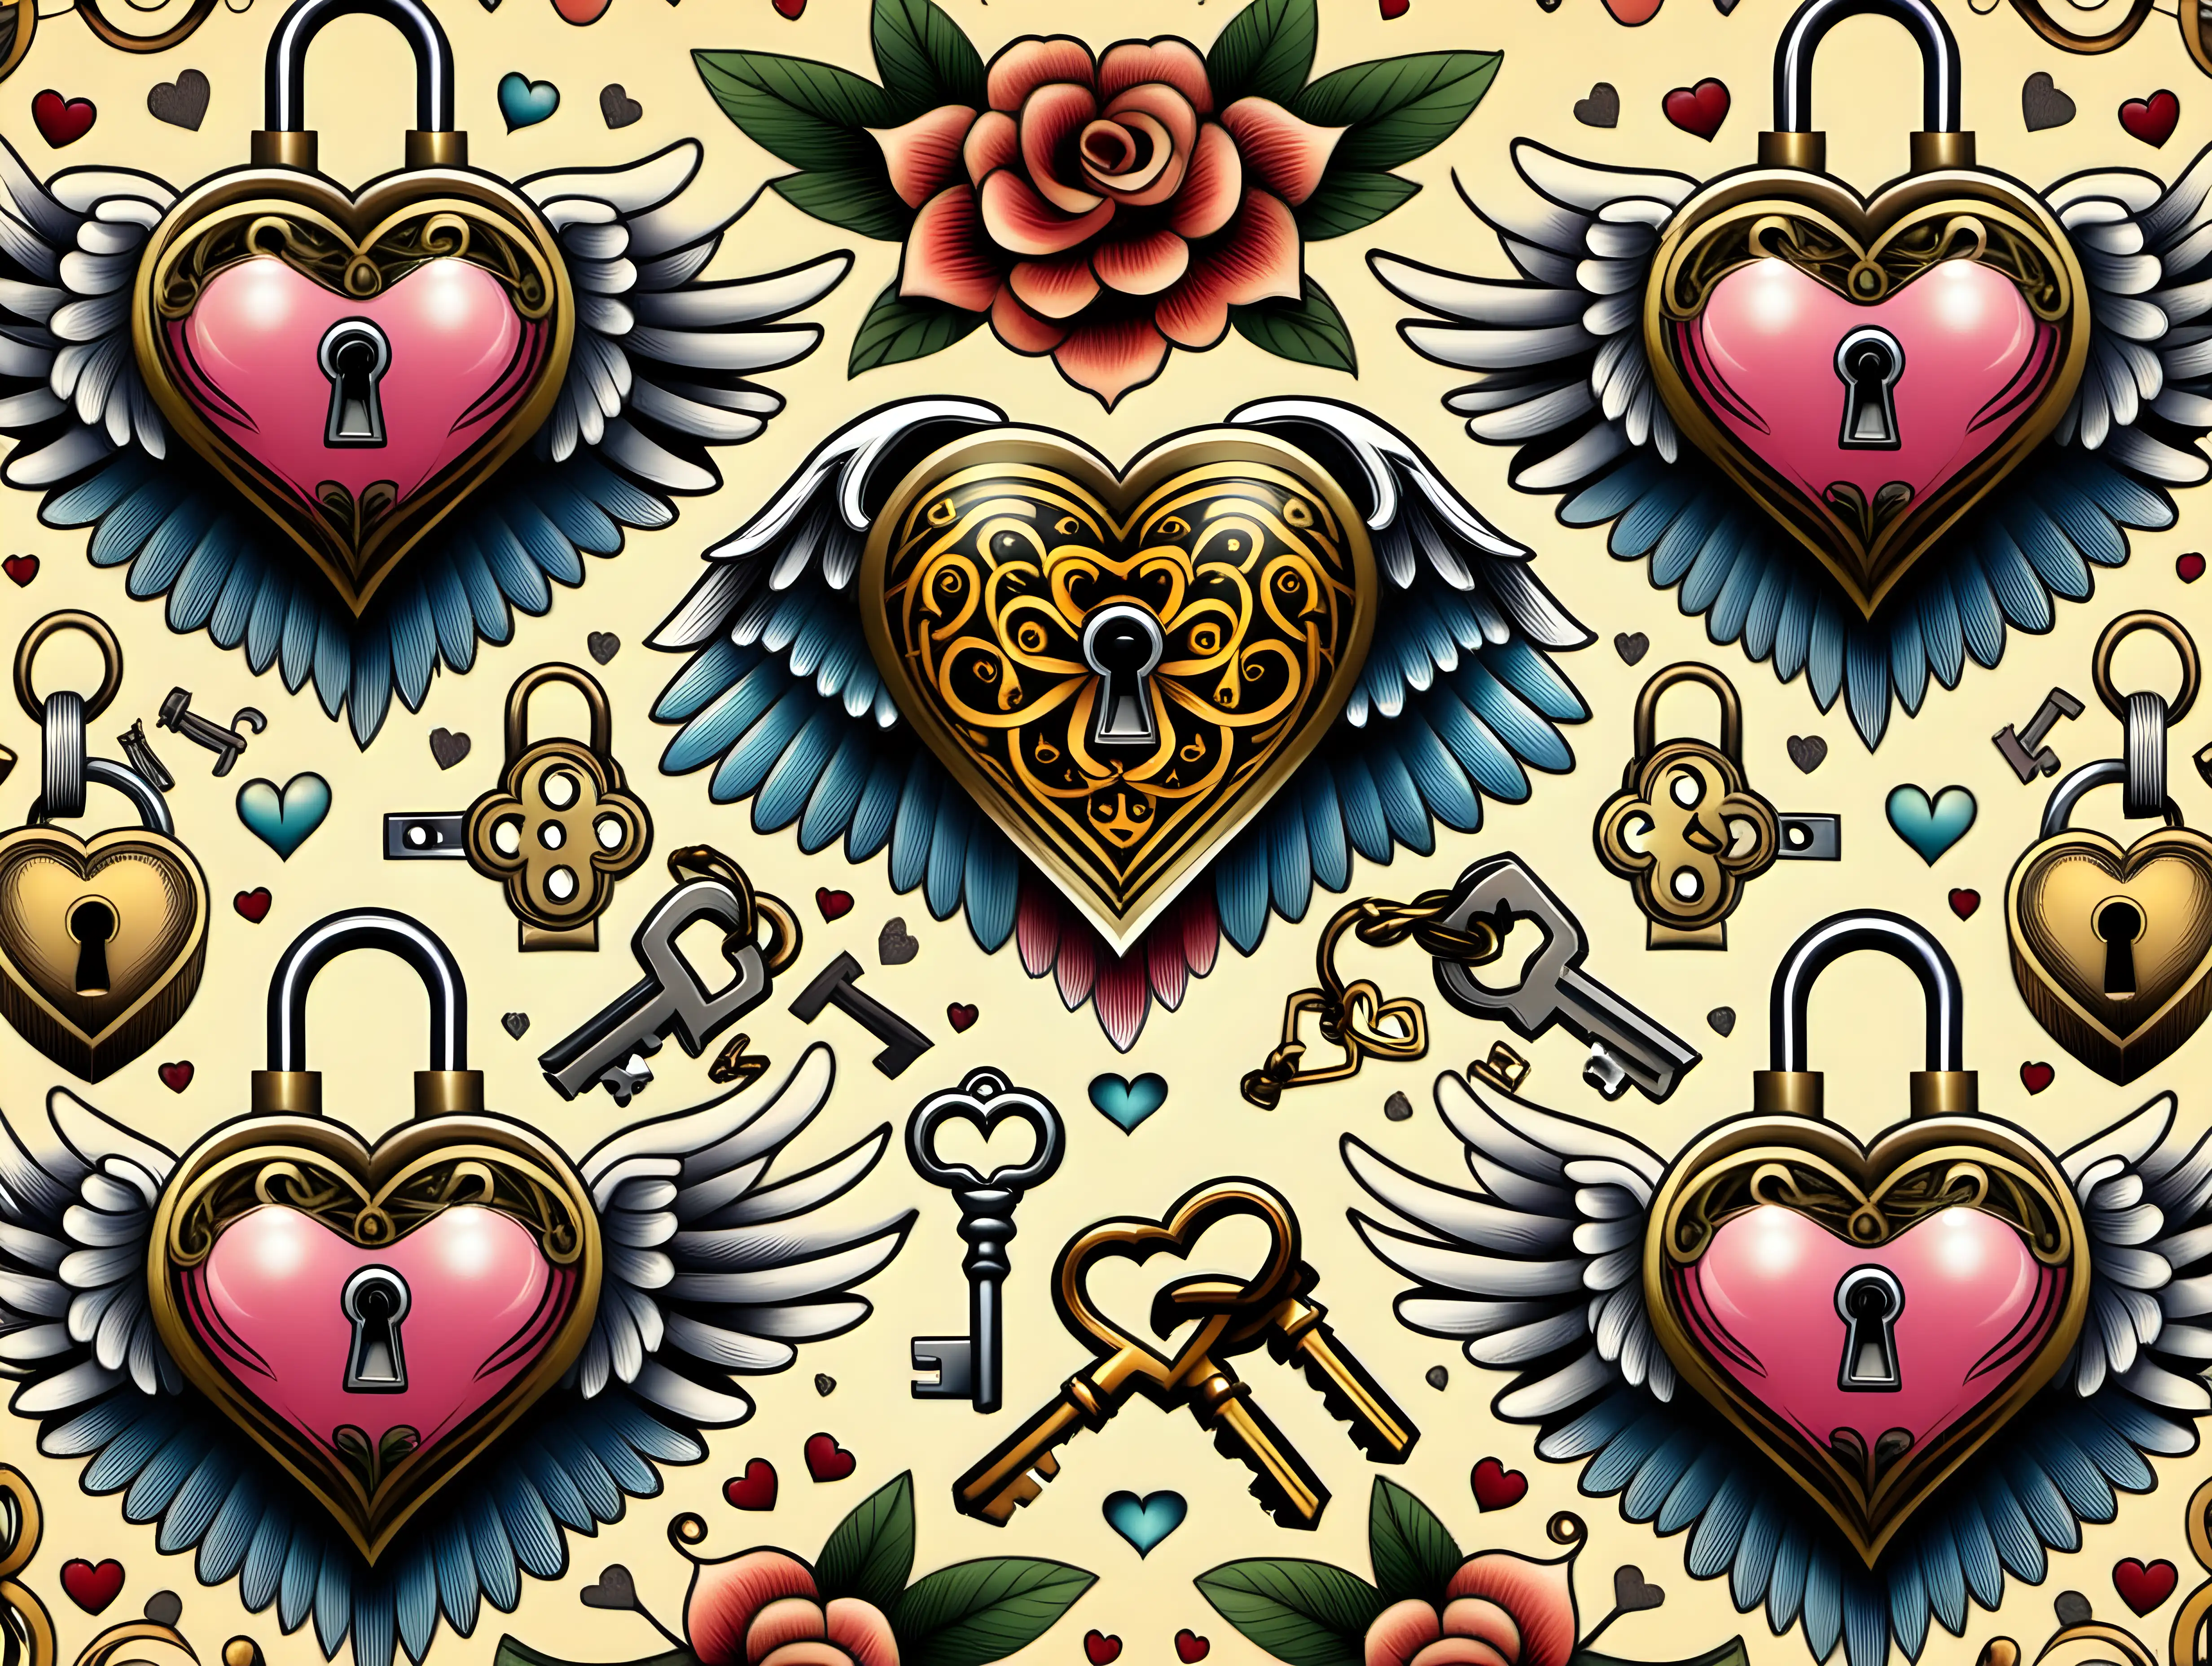 Seamless Oldschool Tattoo Design with Heart Wings Angel Sweet Flower Padlock and Key in Colorful Display